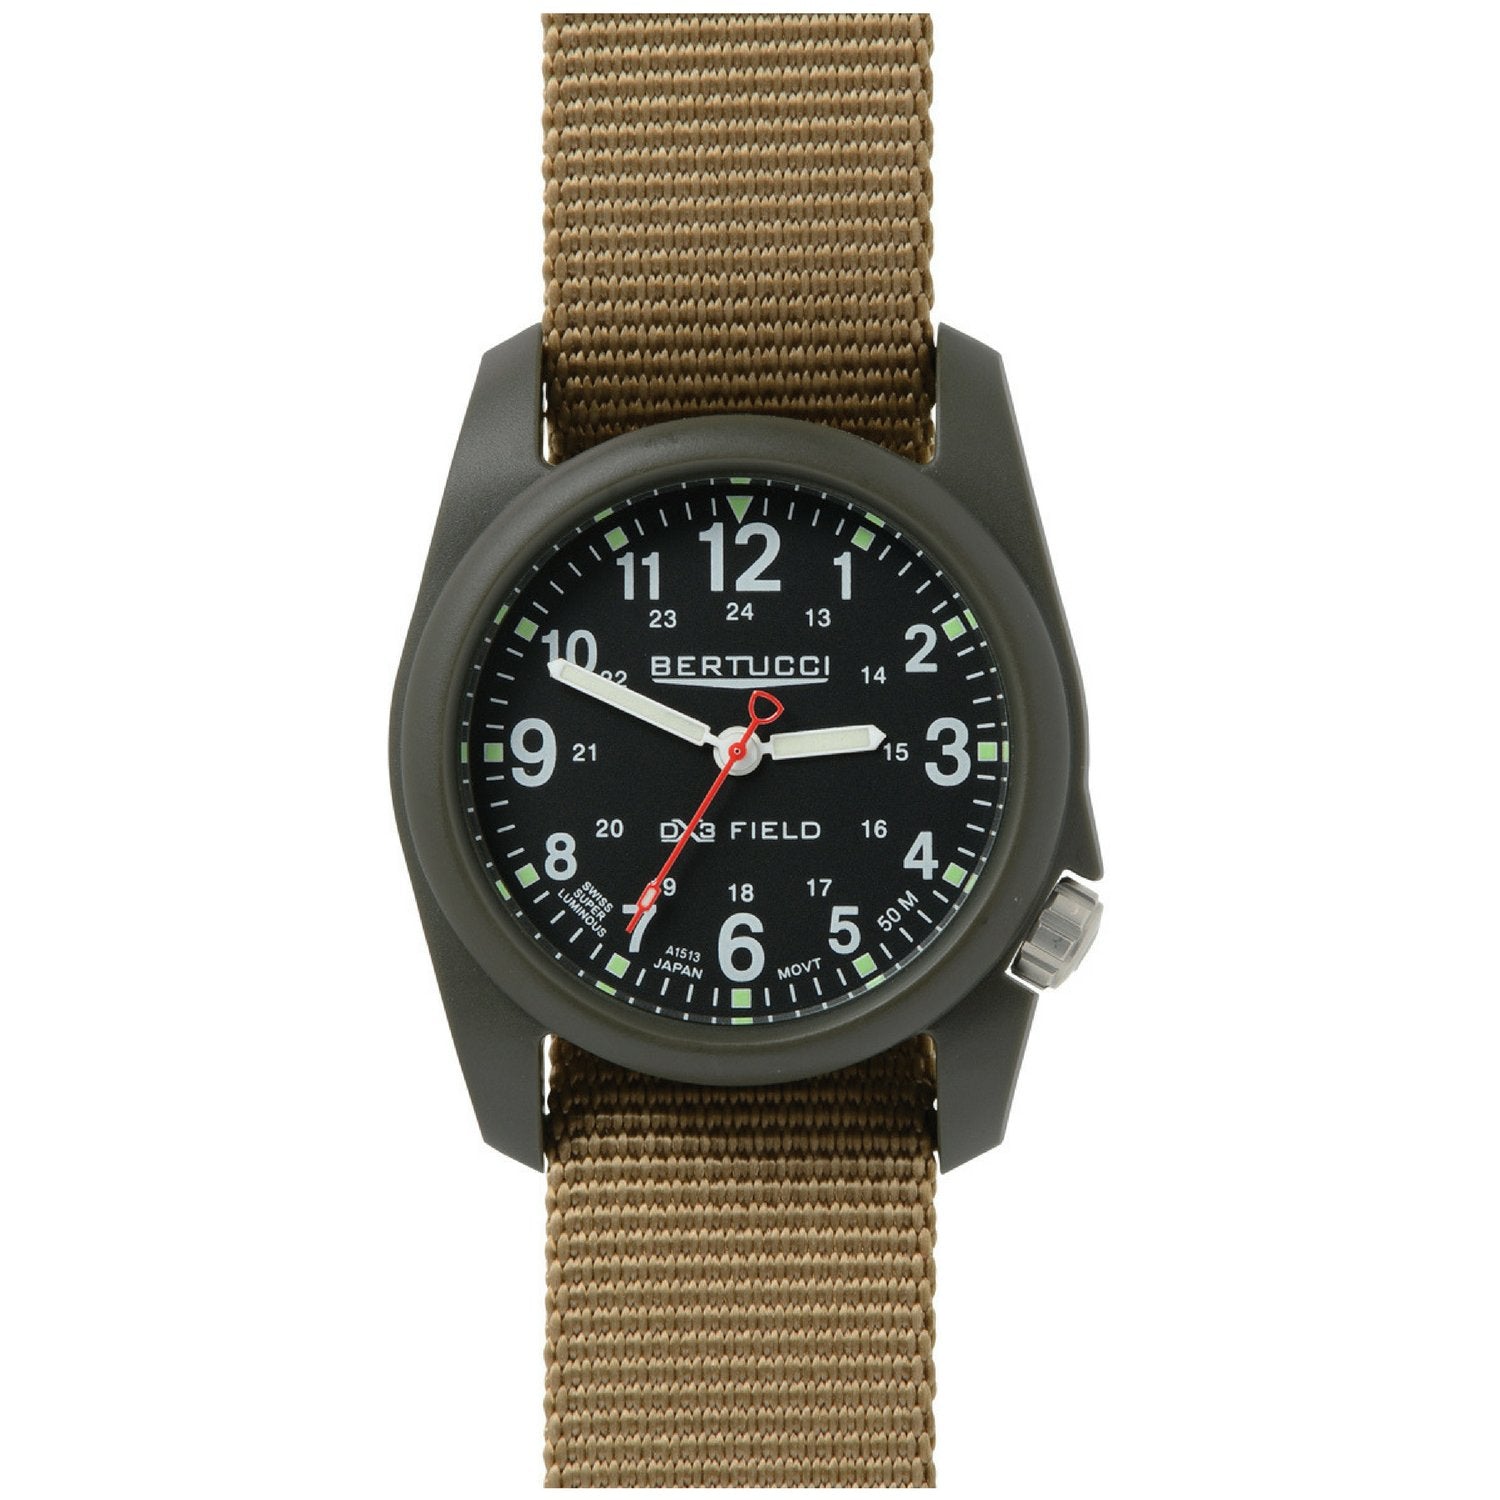 Bertucci DX3 Olive Resin Watch, Coyote Nylon Strap, Black Dial - 11027